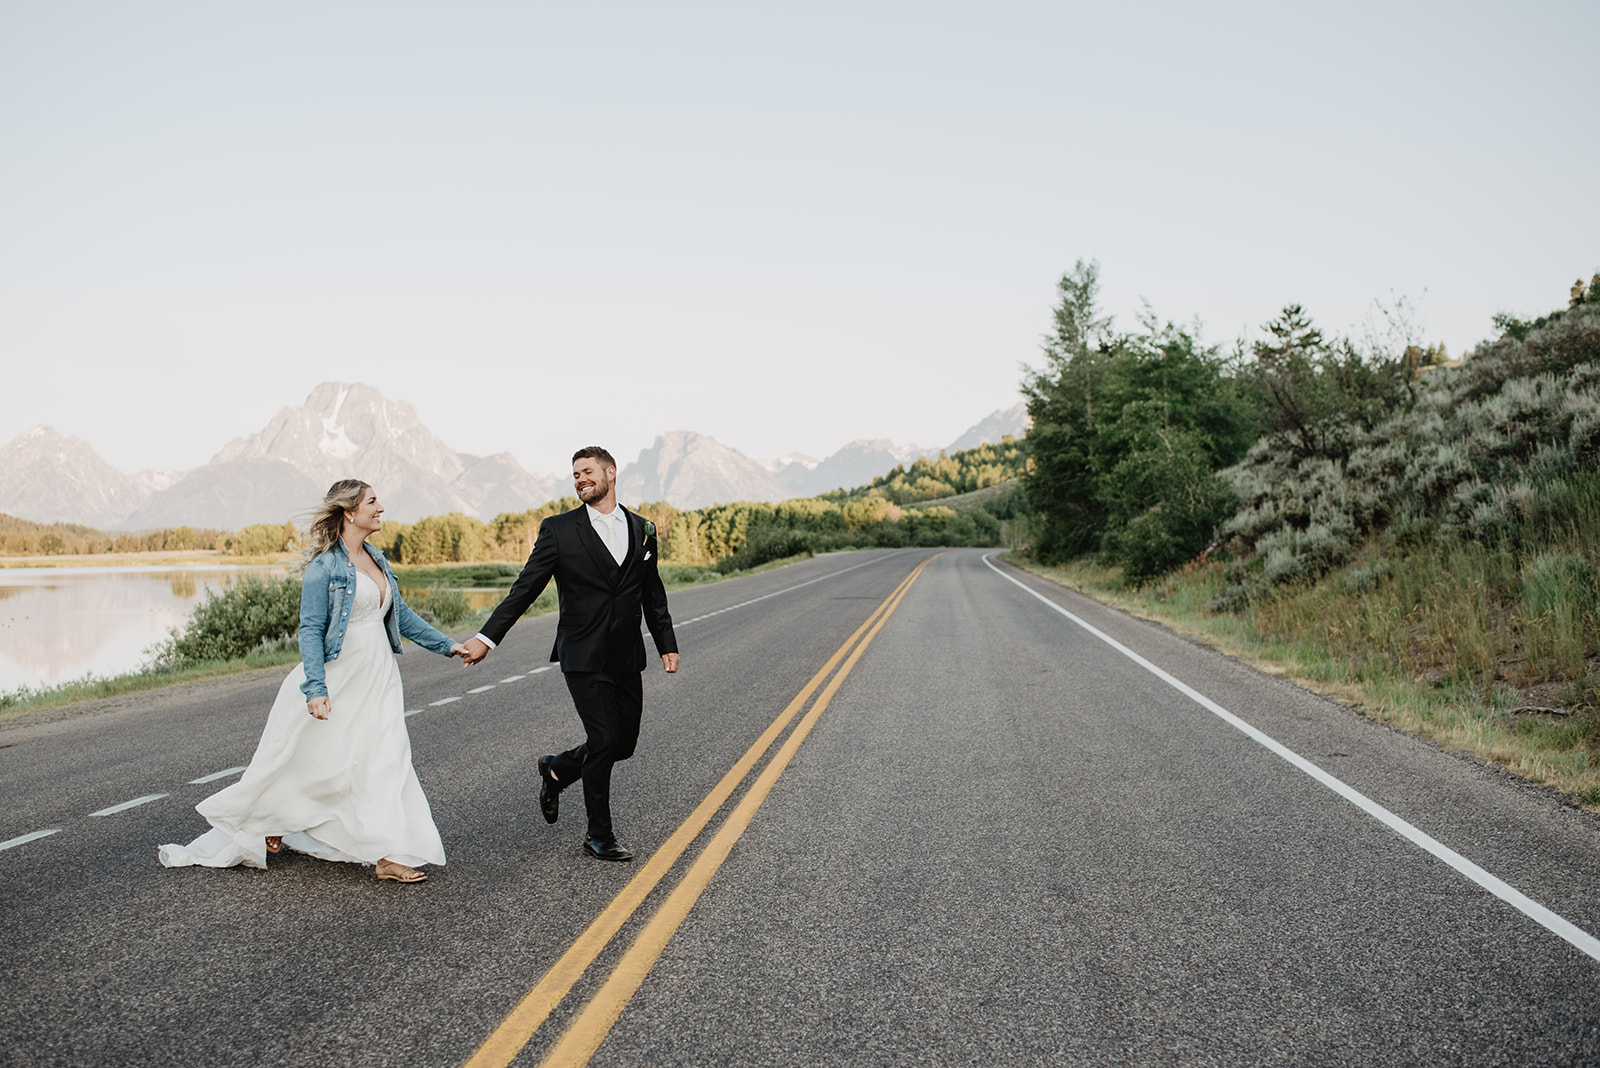 Jackson Hole wedding day at Diamong Cross ranch with groom holding his brides hand as they cross a road in front of the Grand Tetons. Bride is wears a white full gown with a denim jacket over the top and the groom is wearing a classic black suit